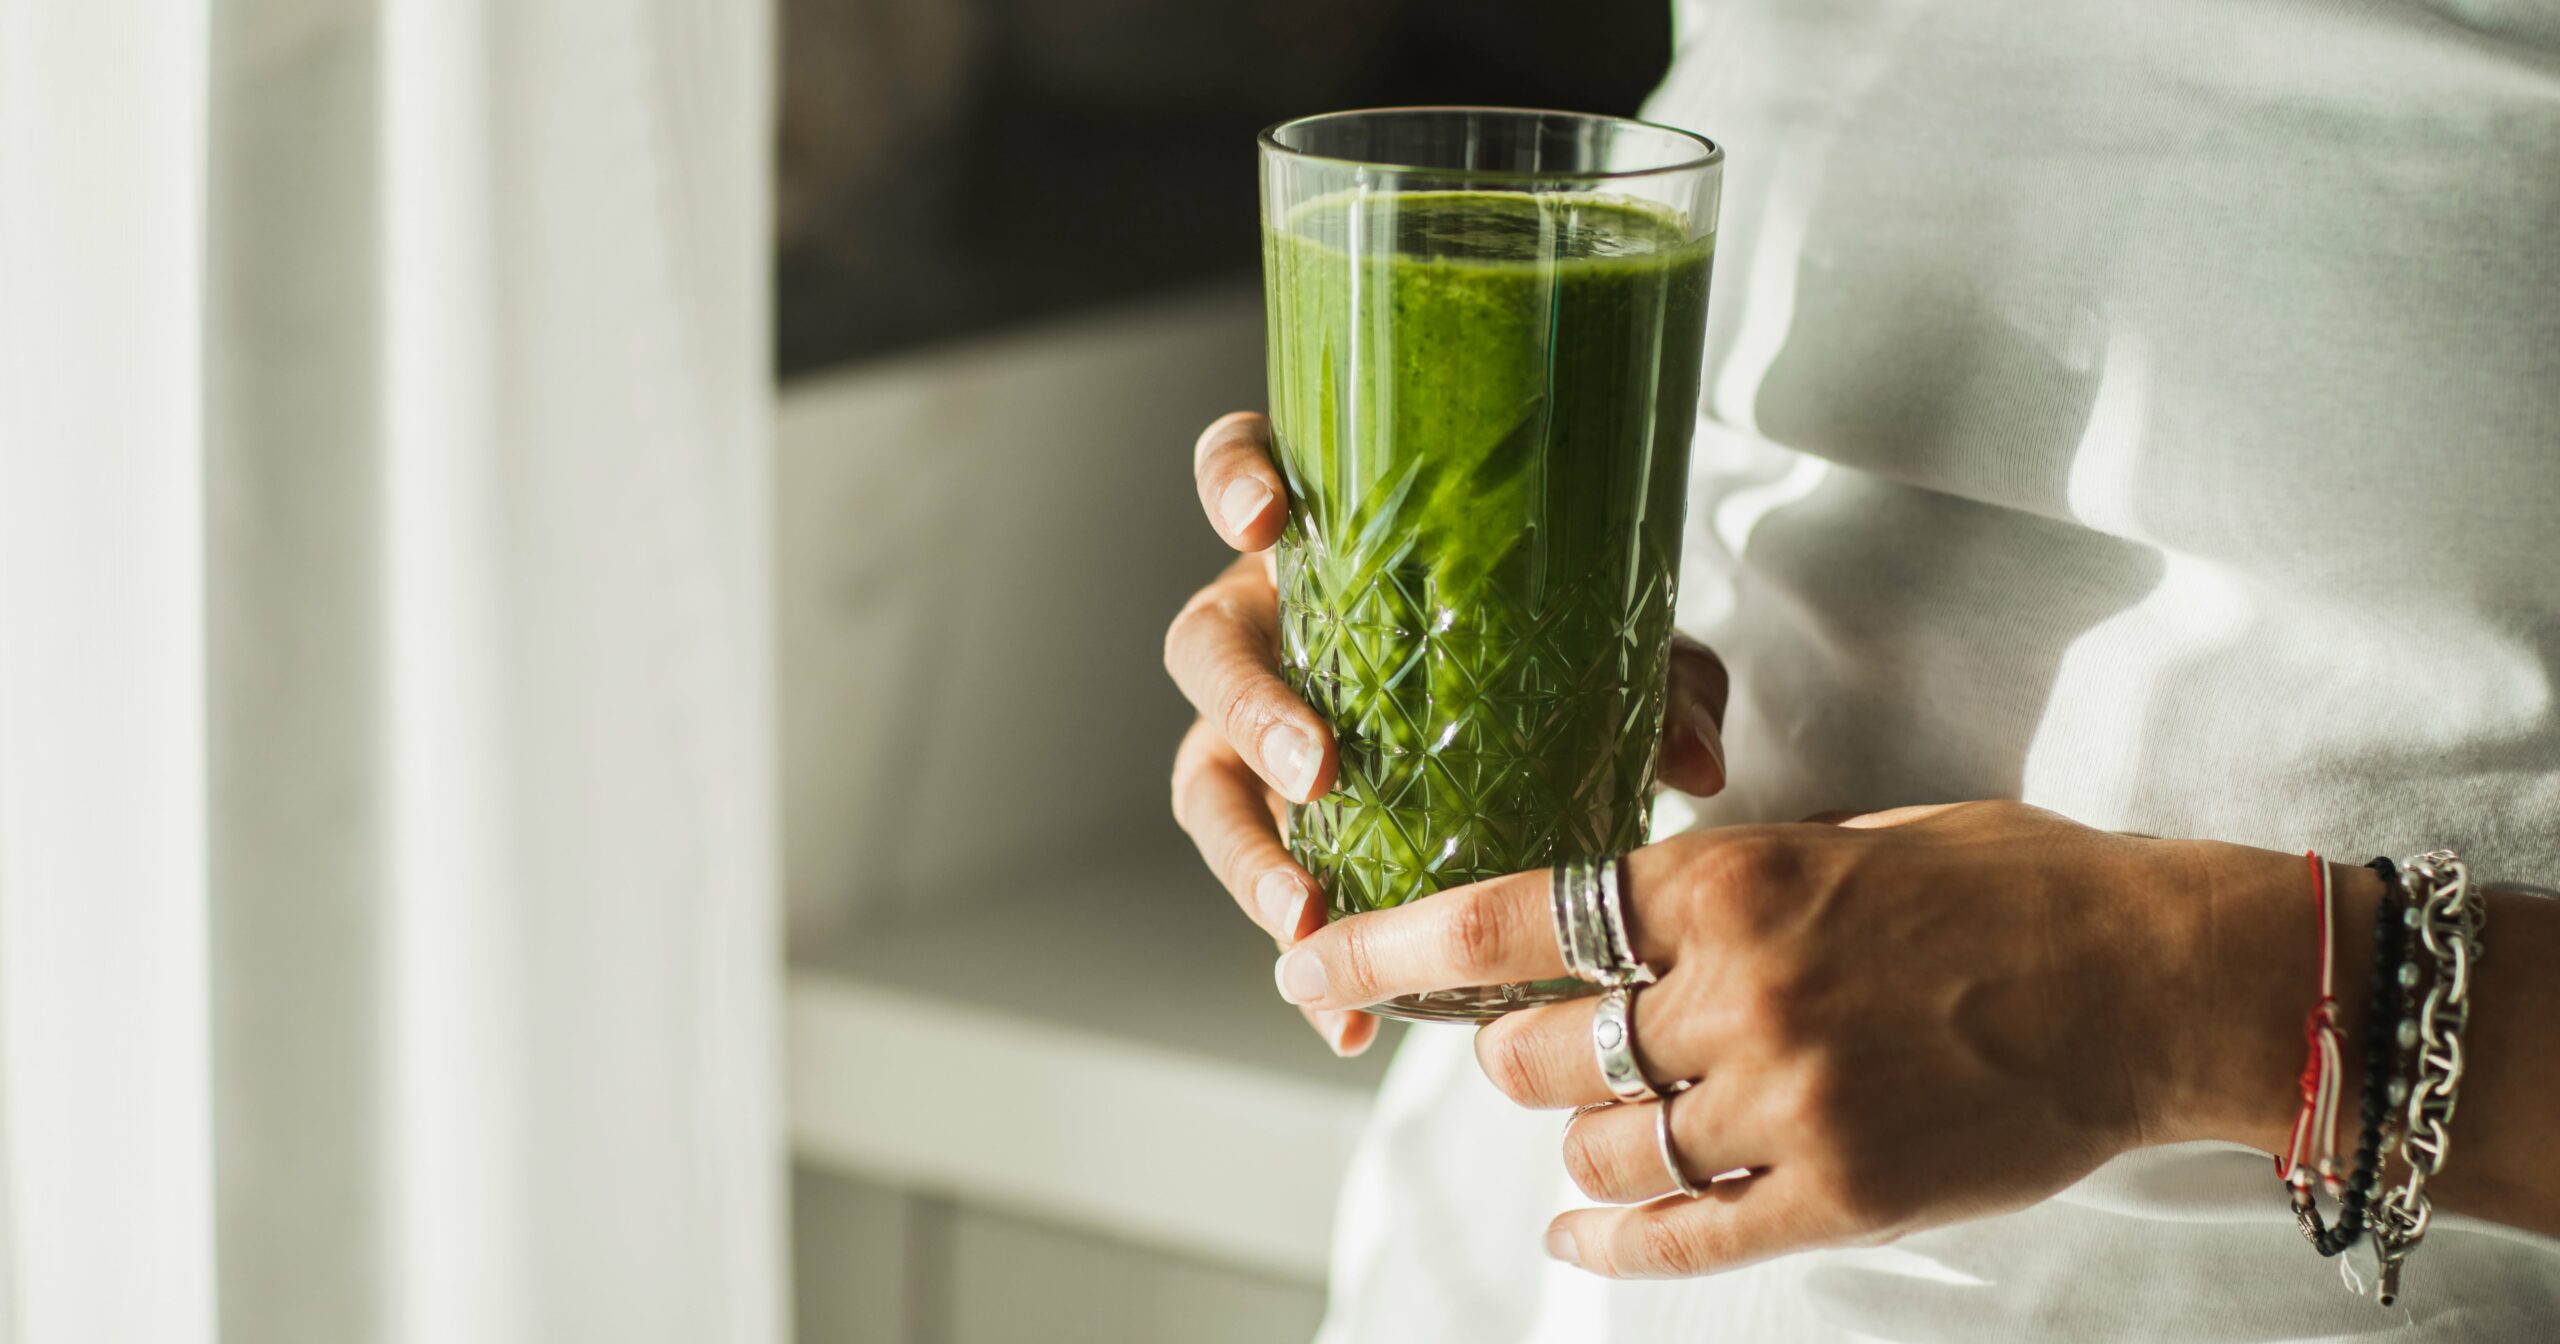 15-healthy-green-smoothie-recipes-that’ll-make-you-feel-like-“that-girl”